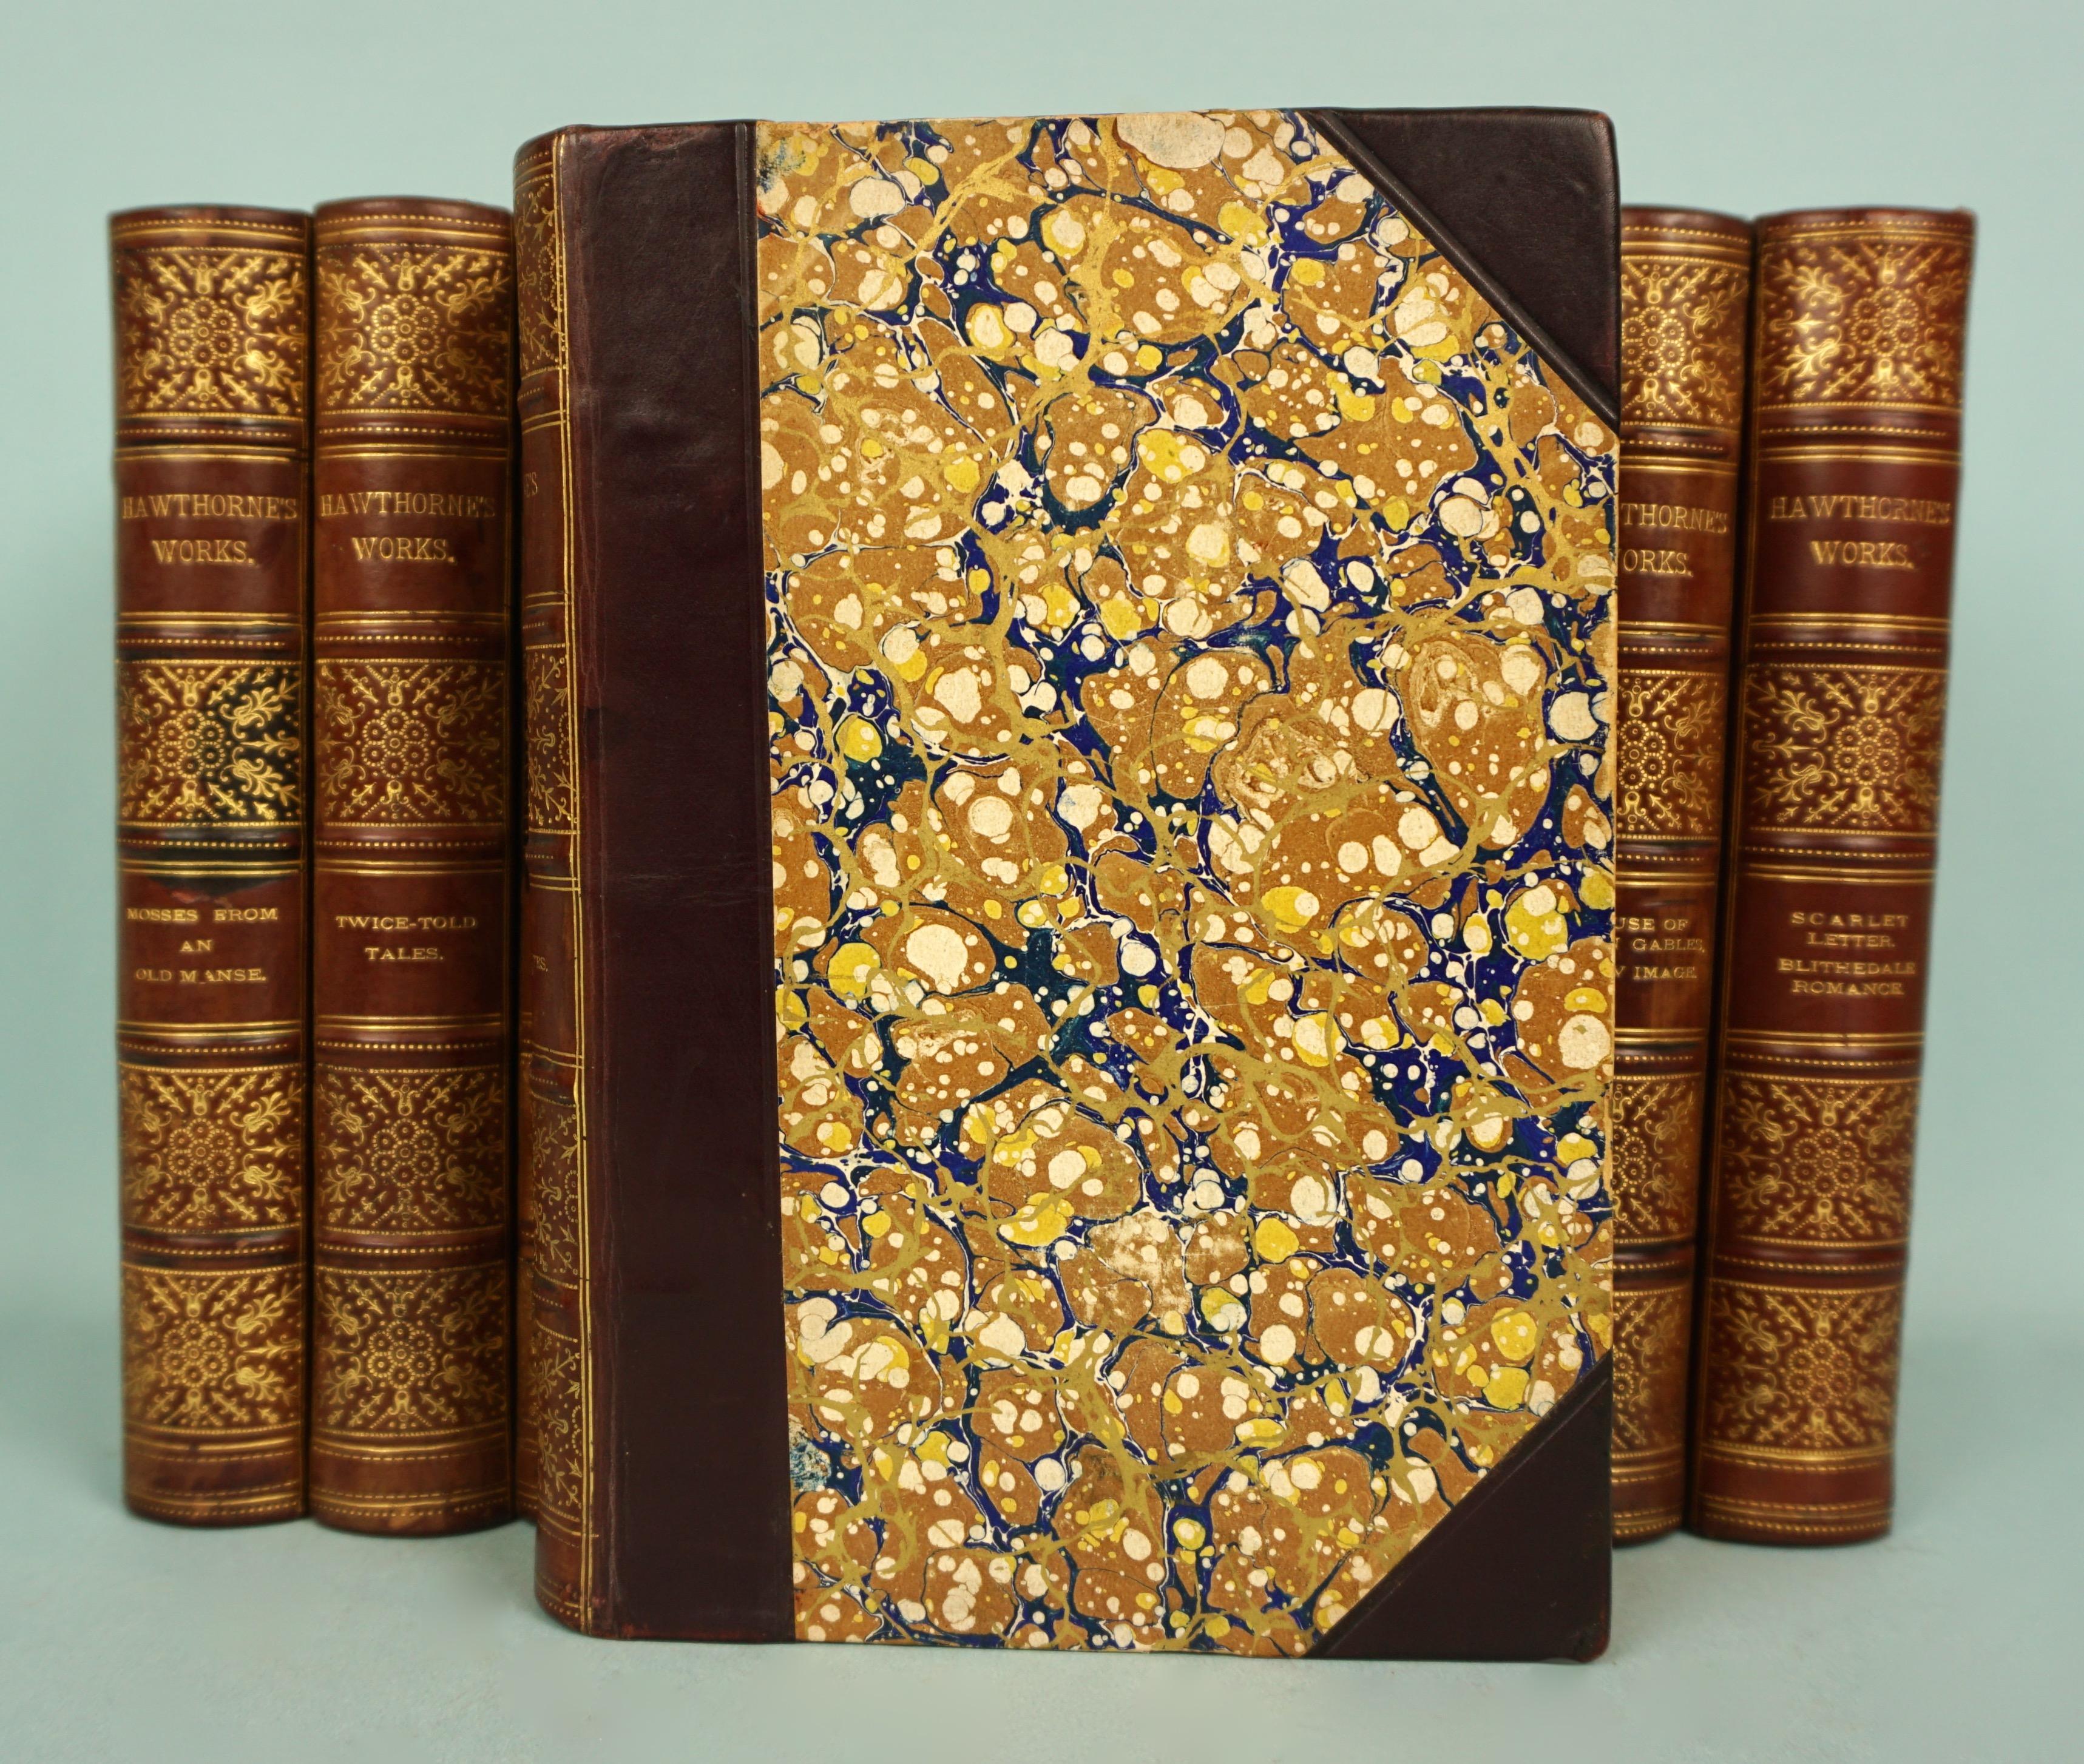 The illustrated works of famous American novelist Nathaniel Hawthorne (1804-1864 in 10 volumes, including The Scarlet Letter, House of Seven Gables, English Notes and The Snow Image. Bound in brown leather with marbleized boards and end papers and